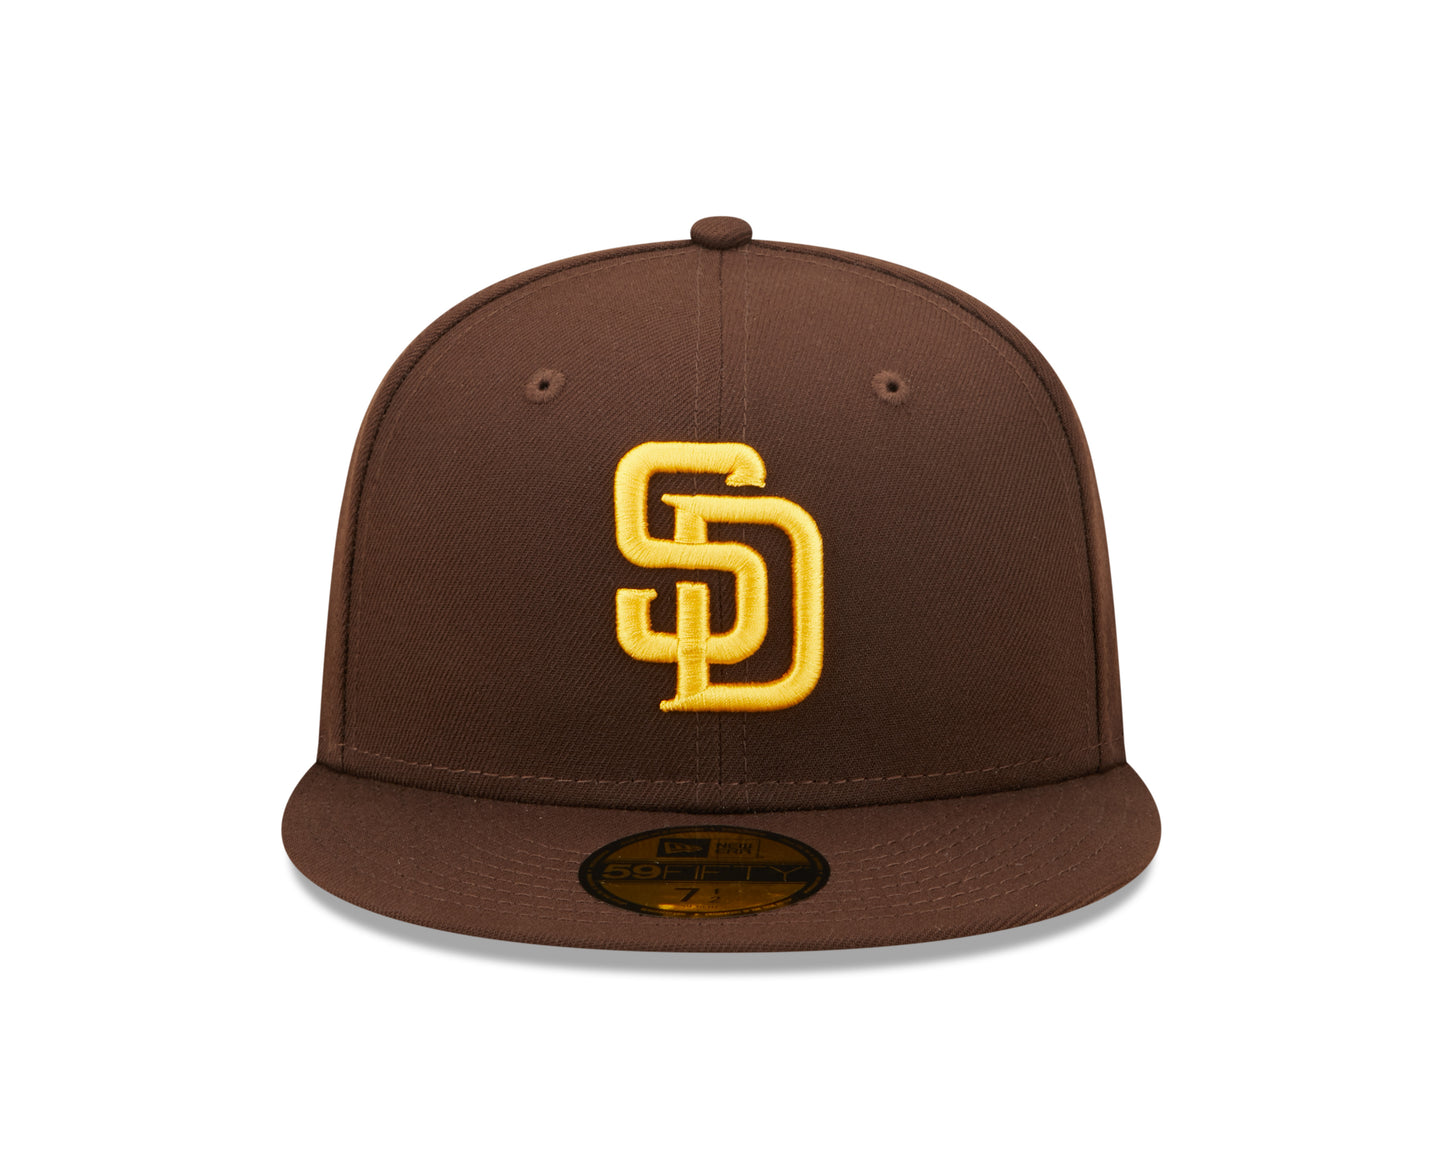 59Fifty Fitted Cap San Diego Padres AC Perf - Brown - Headz Up 